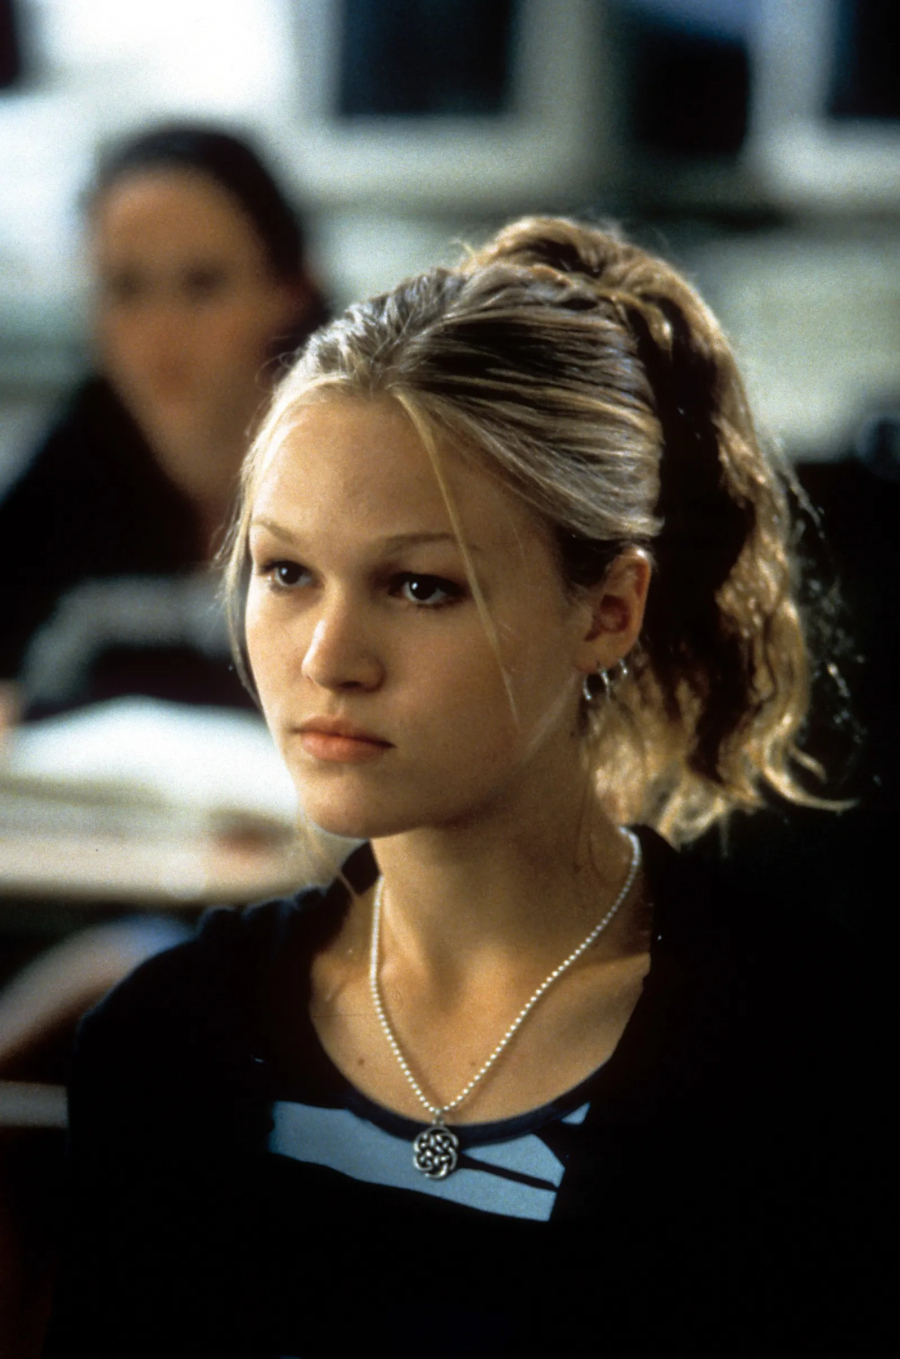 Kat Stratford (Julia Stiles) - 10 Things I Hate About You